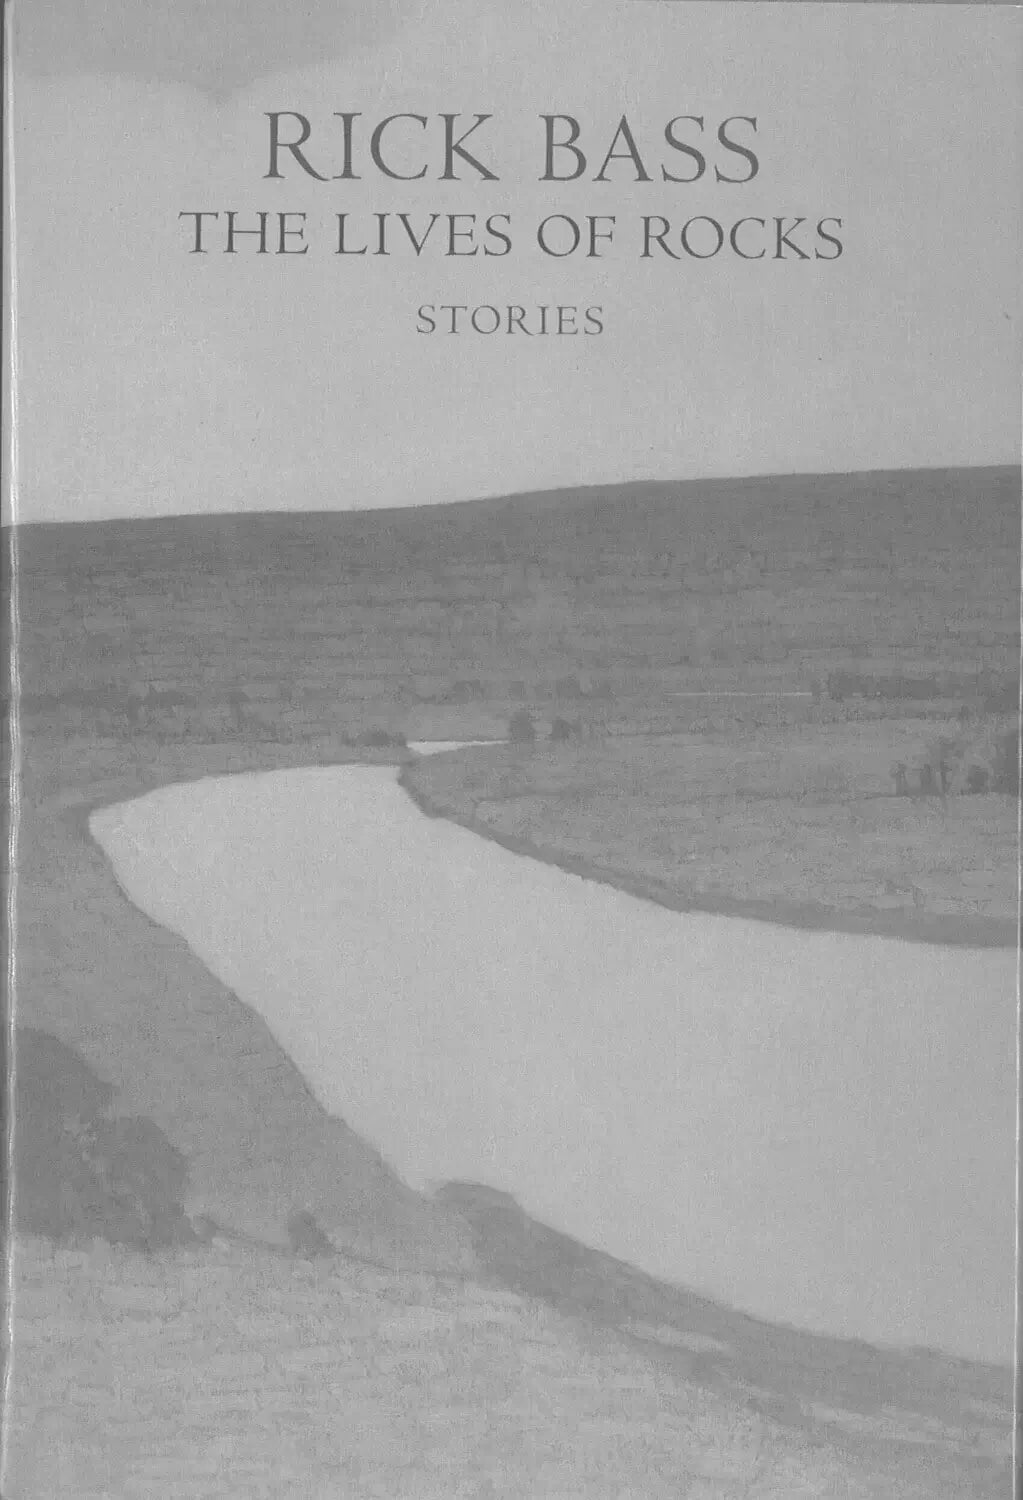 The Lives of Rocks by Rick Bass